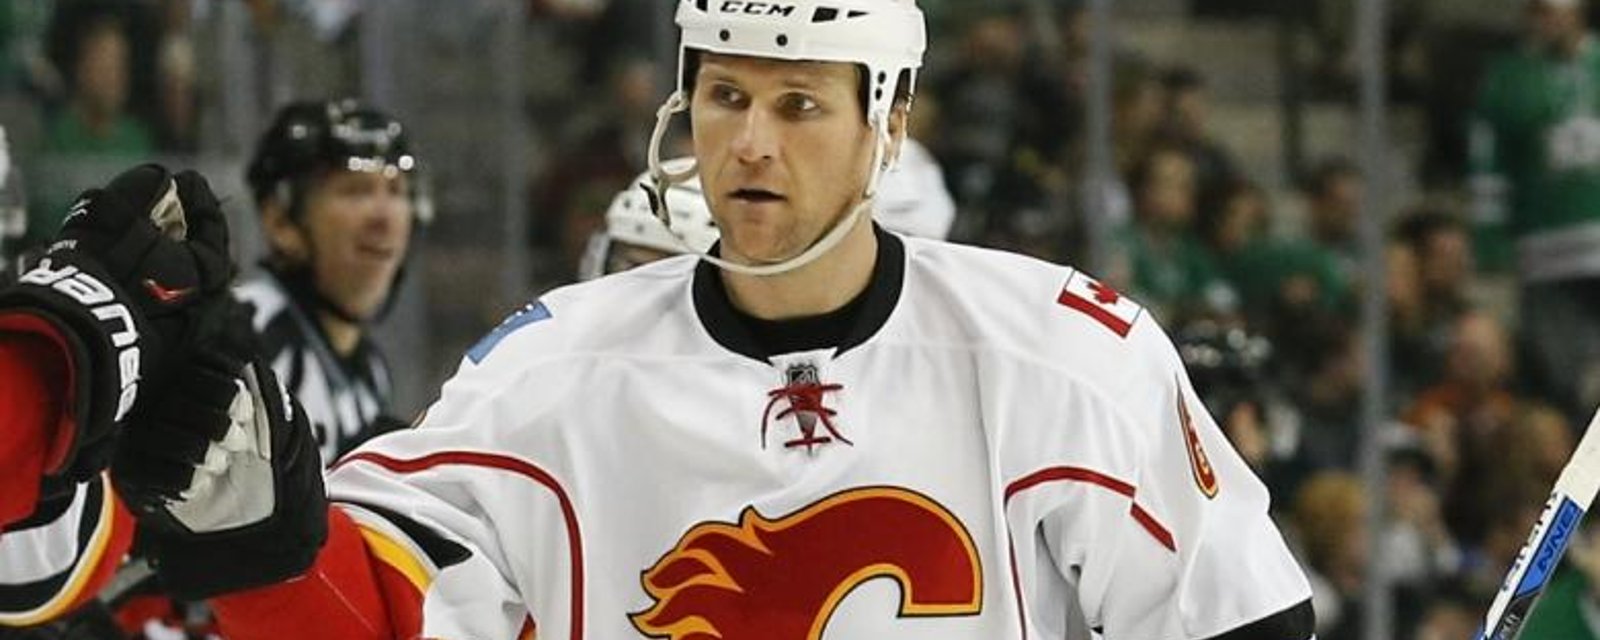 Signs Dennis Wideman may receive a harsh punishment for his hit on an official.